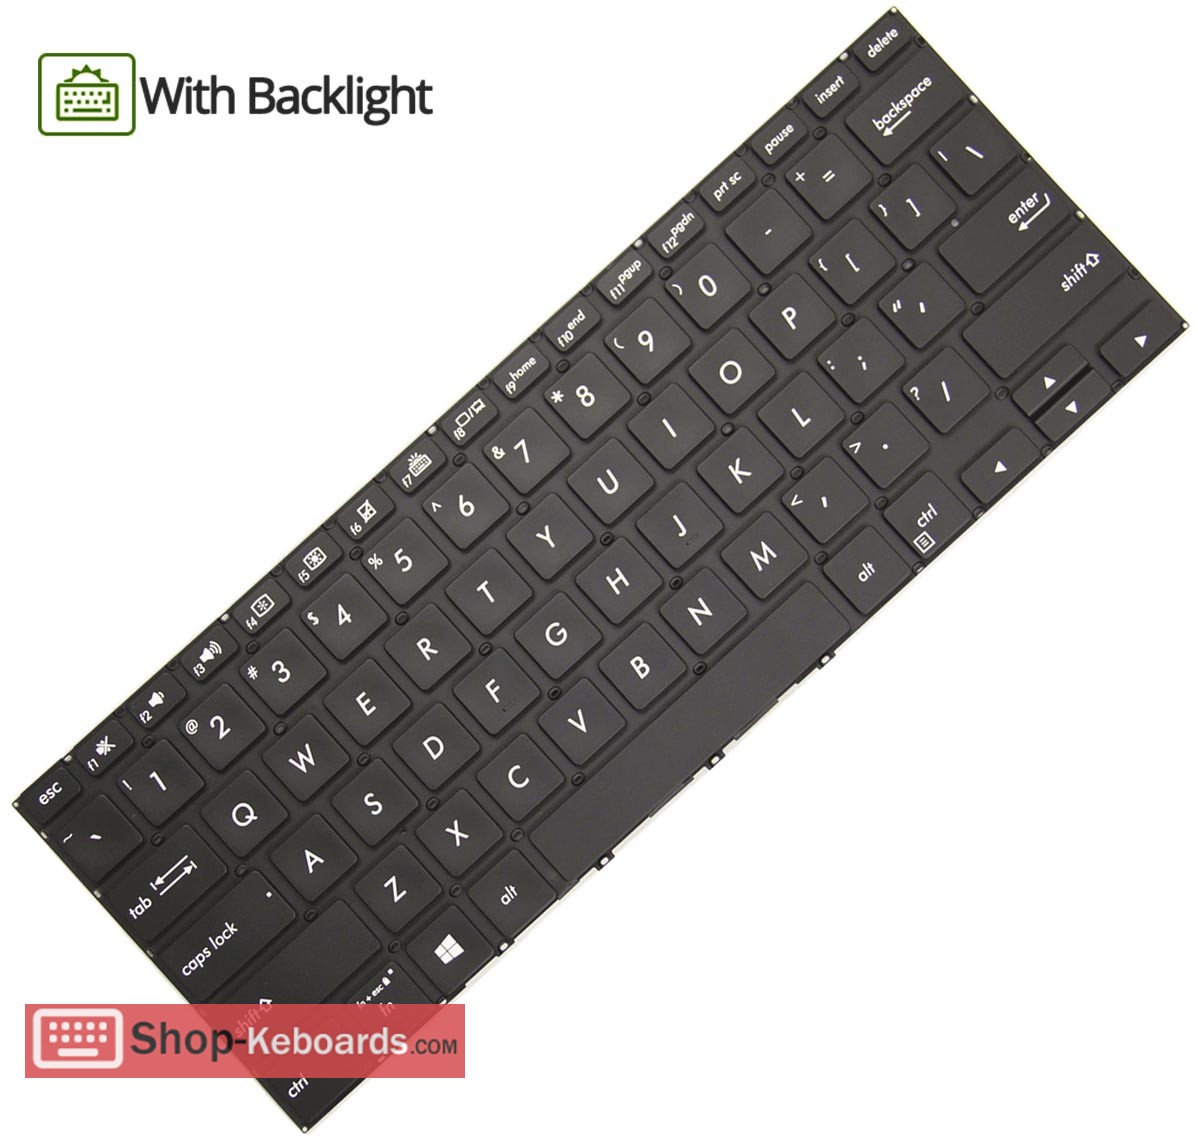 Asus 0KNB0-1626AR00 Keyboard replacement